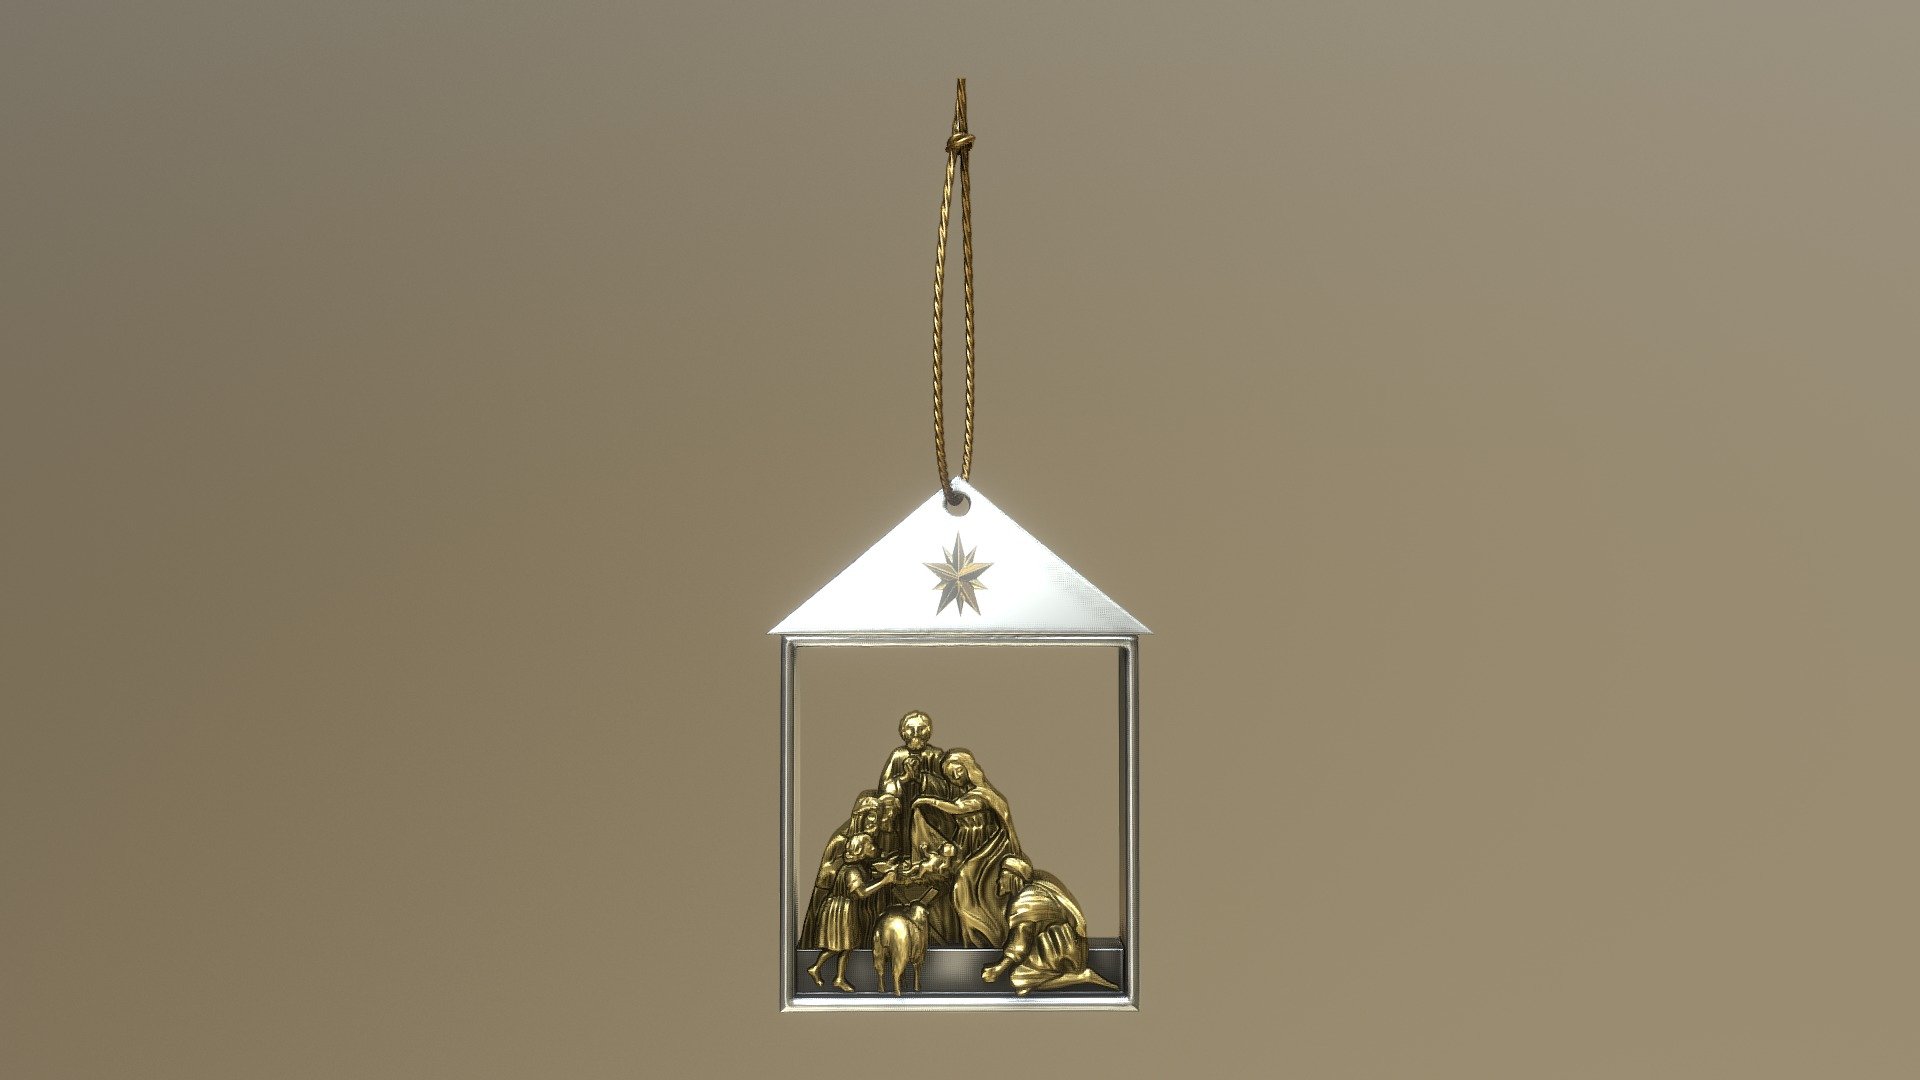 Originally designed for 3D printing and CNC milling - Nativity Ornament - 3D model by Alolkoy 3d model